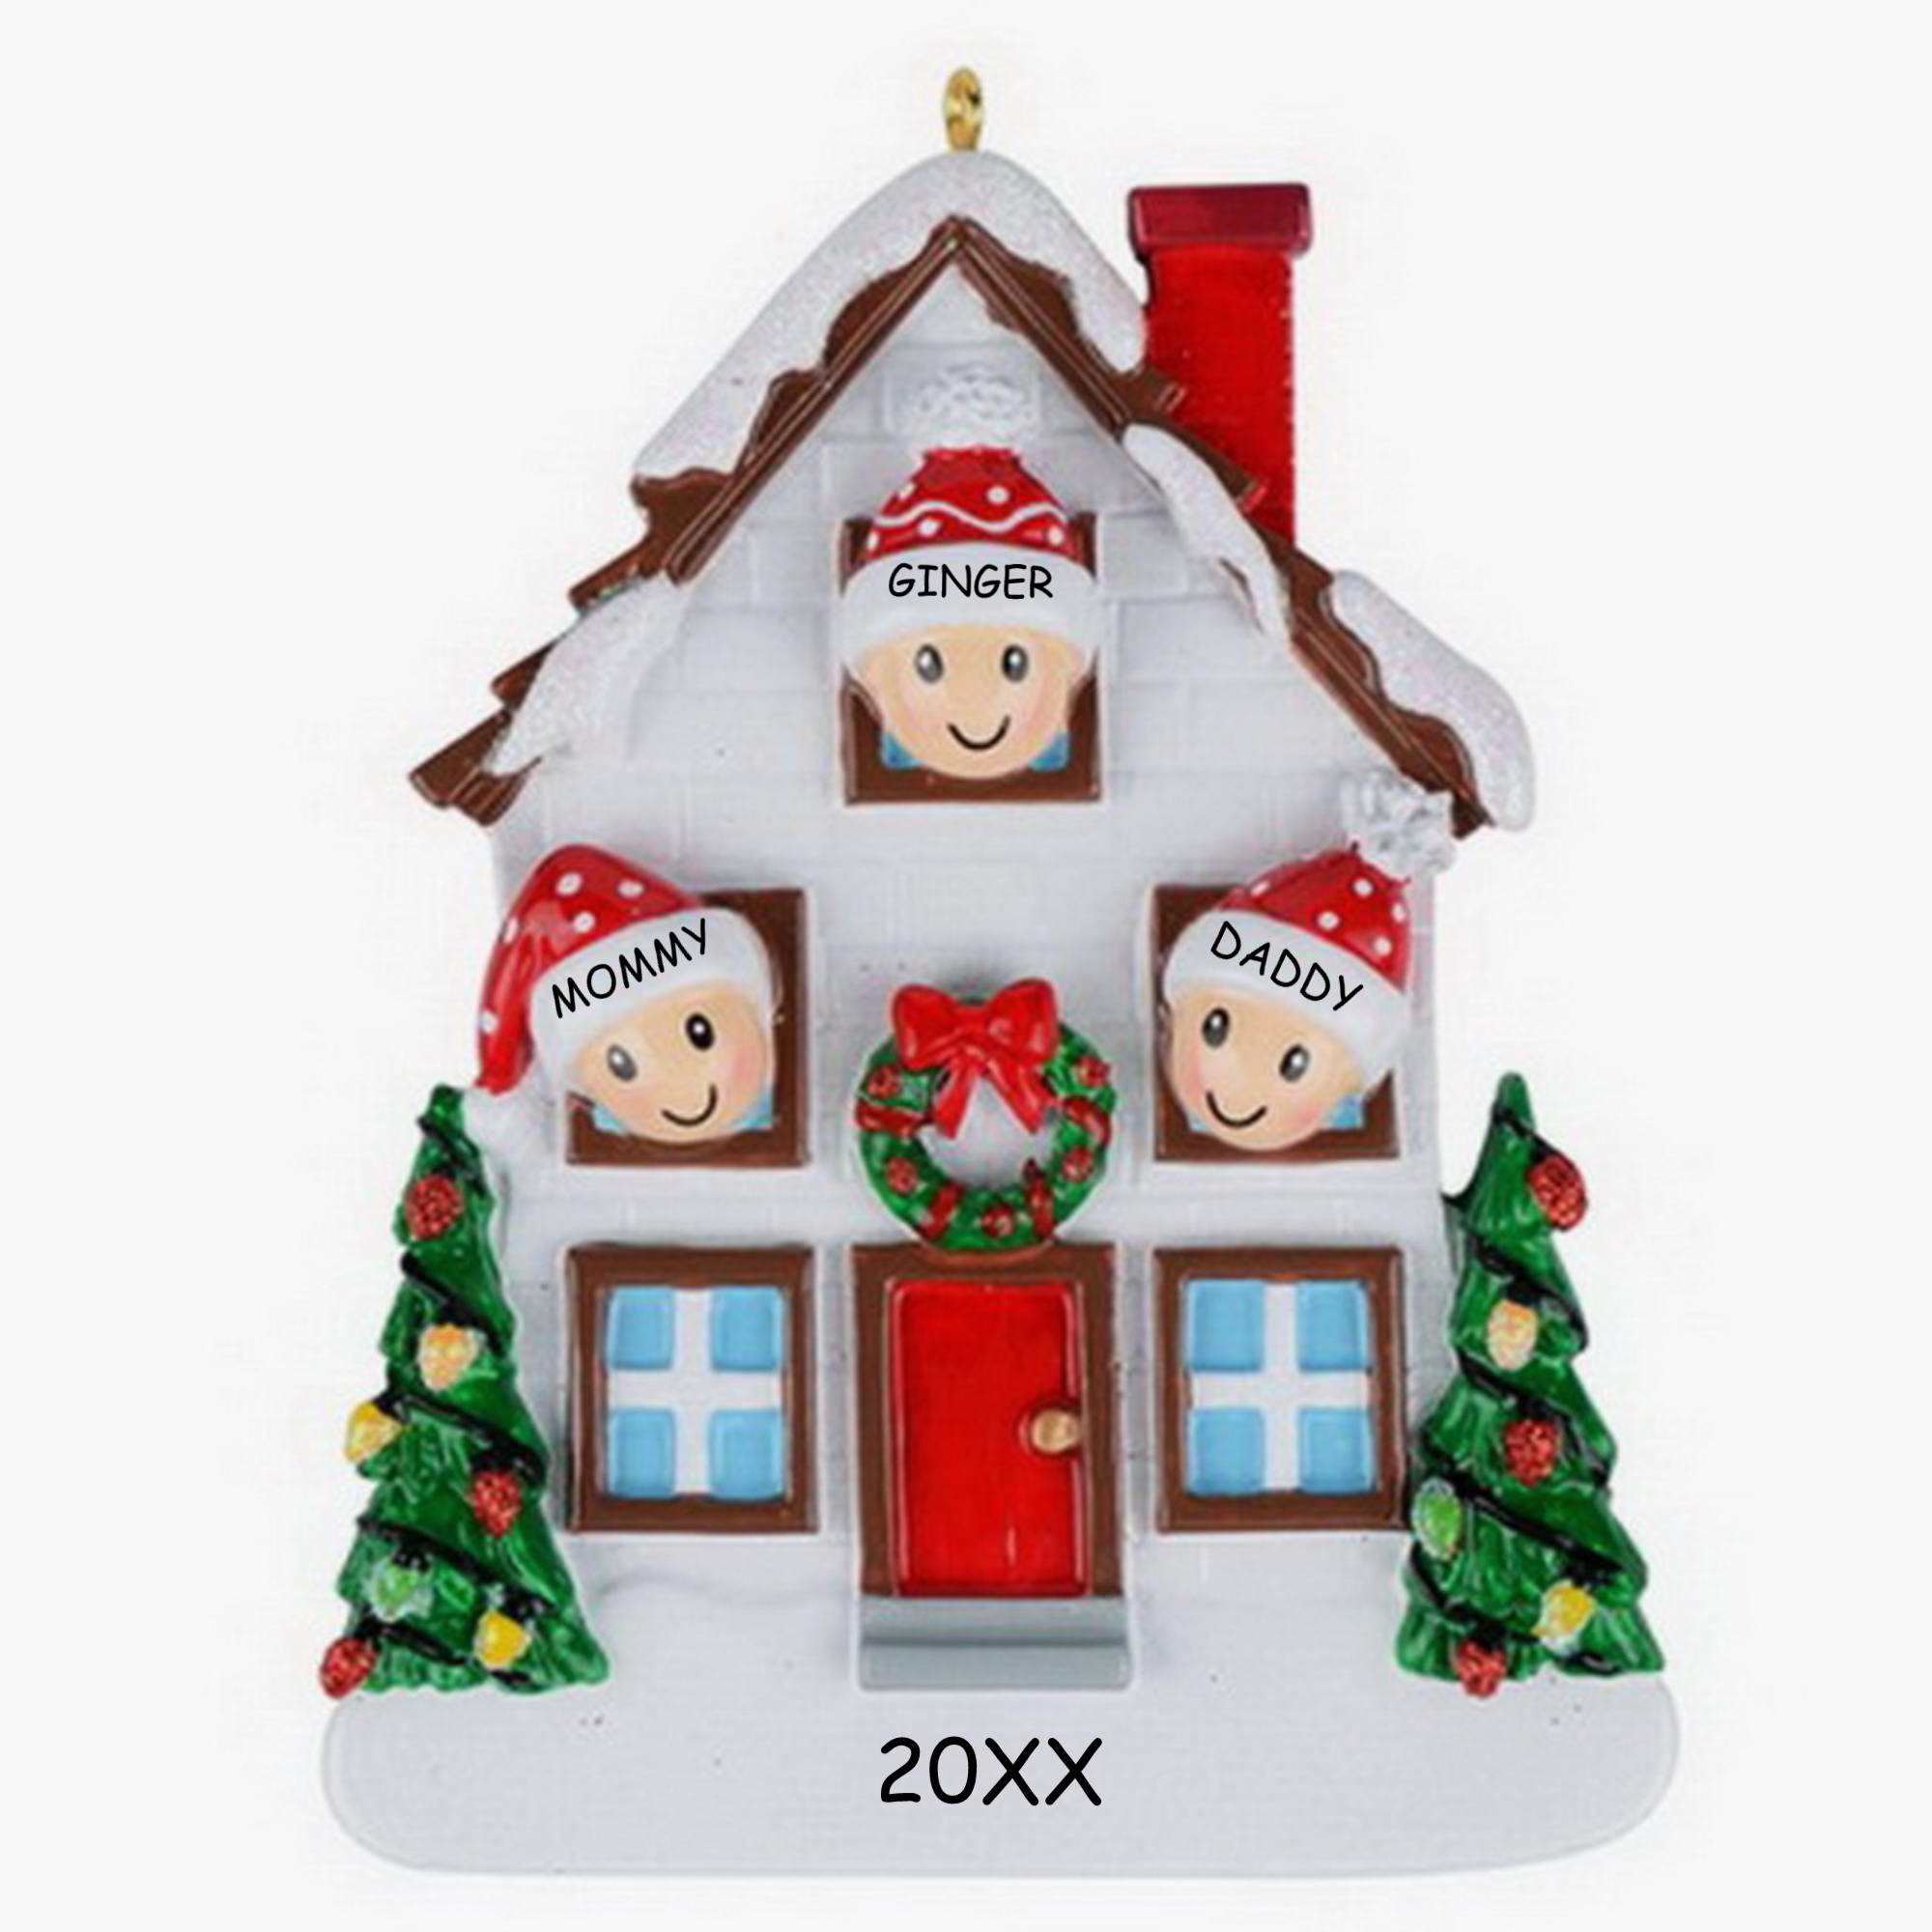 Personalized Home For Christmas Family Ornament - Family of 3